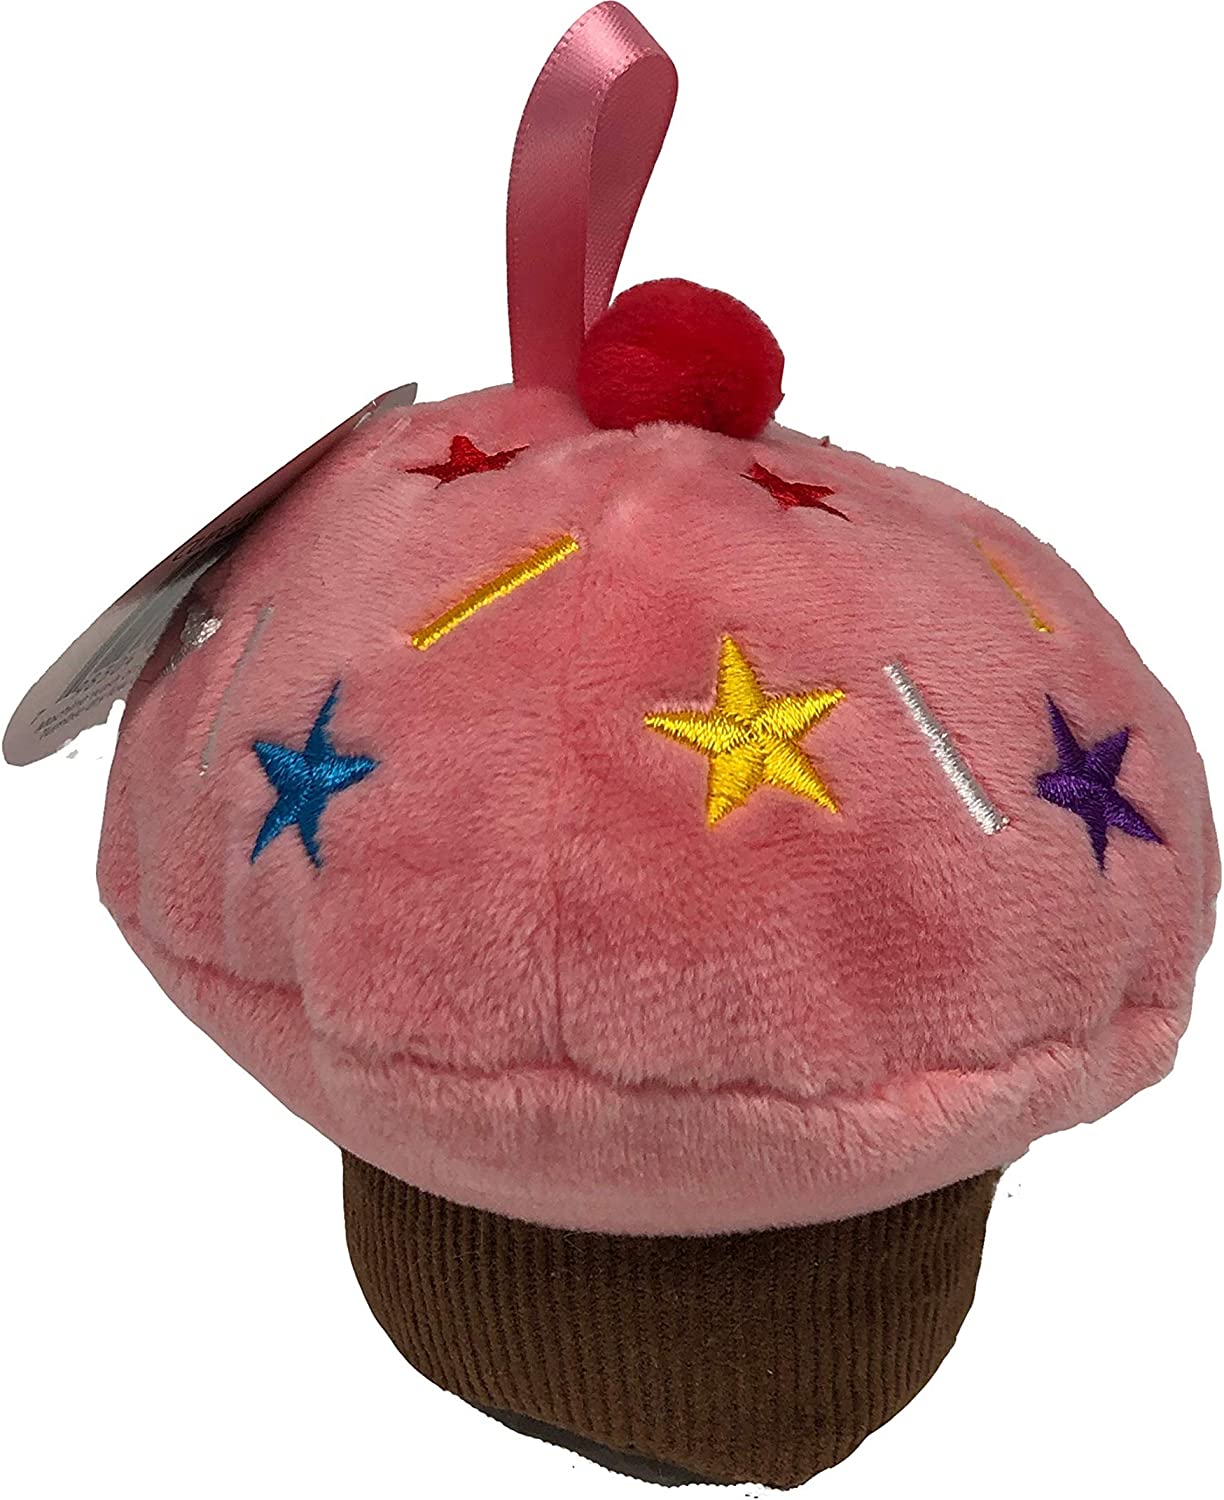 BBP - Baby Paper/ Wize Choice Baby Paper/ Wize Choice Plush Cupcake-Strawberry - Little Miss Muffin Children & Home